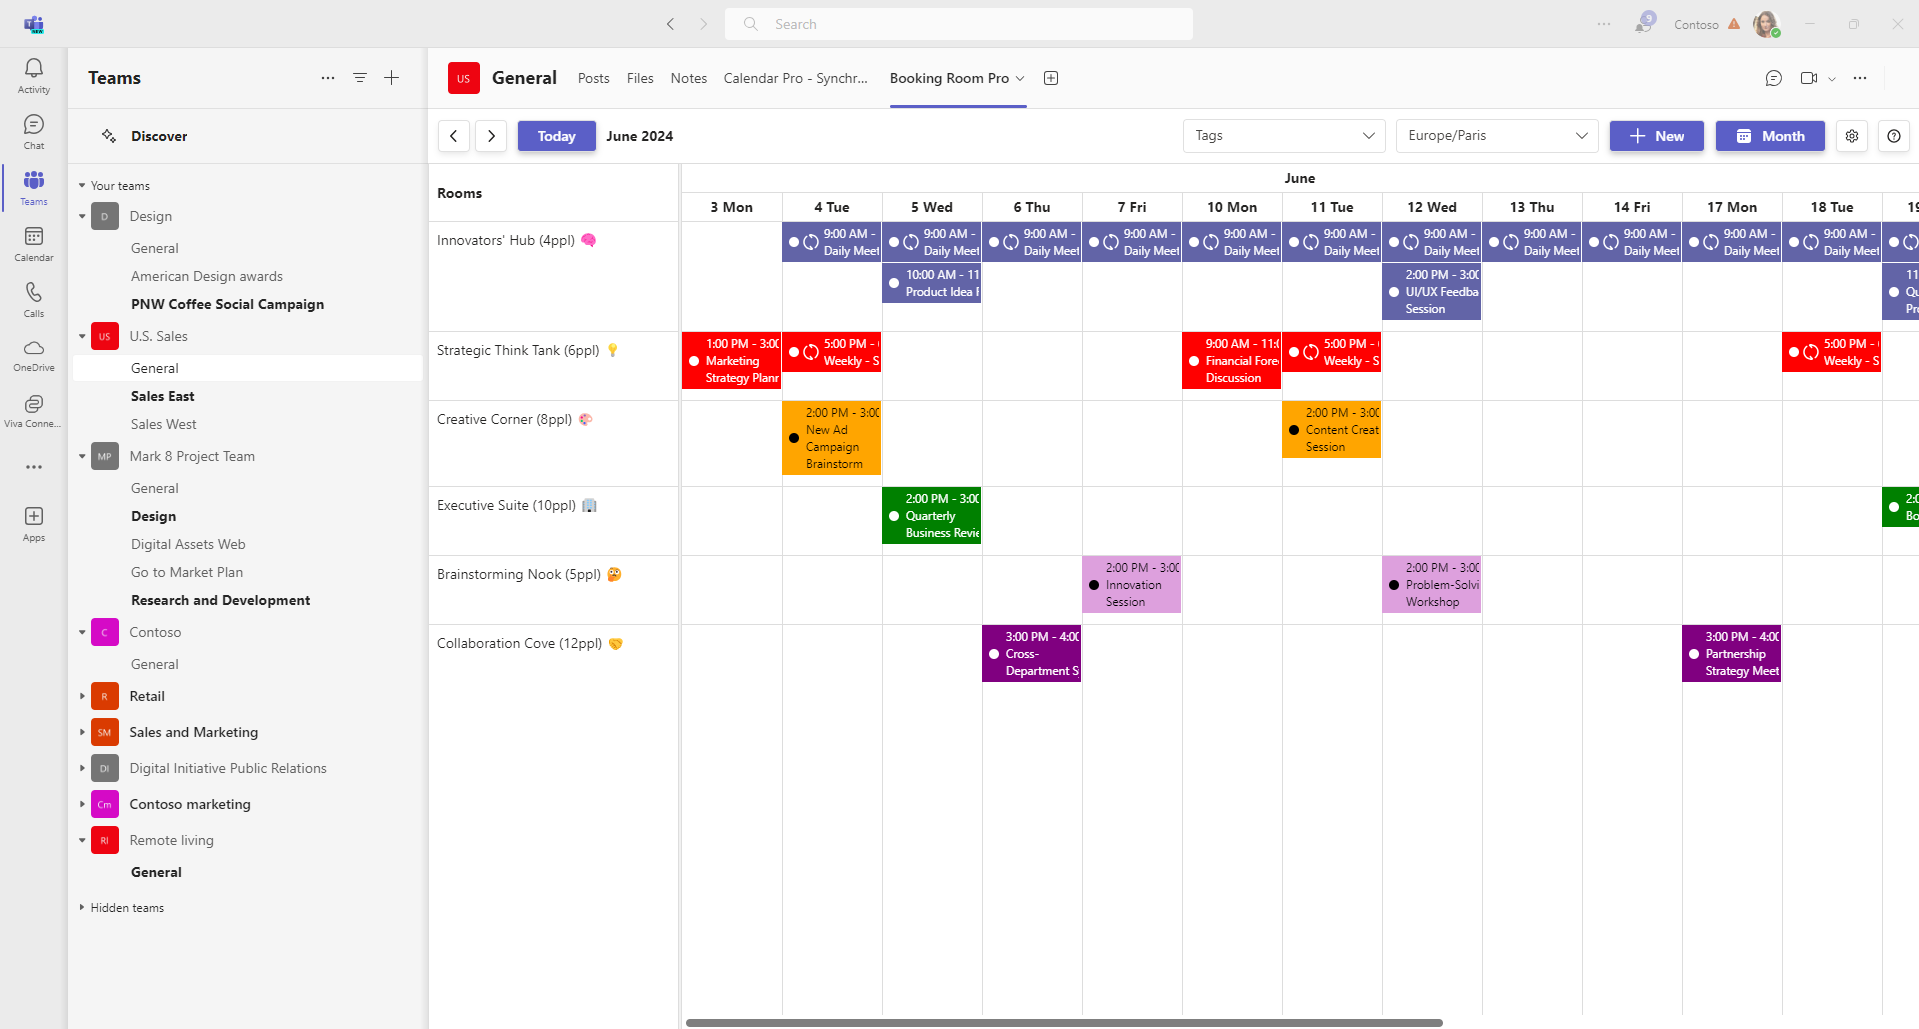 A screenshot of the Booking Room Pro app shows the availability of a variety of office spaces.